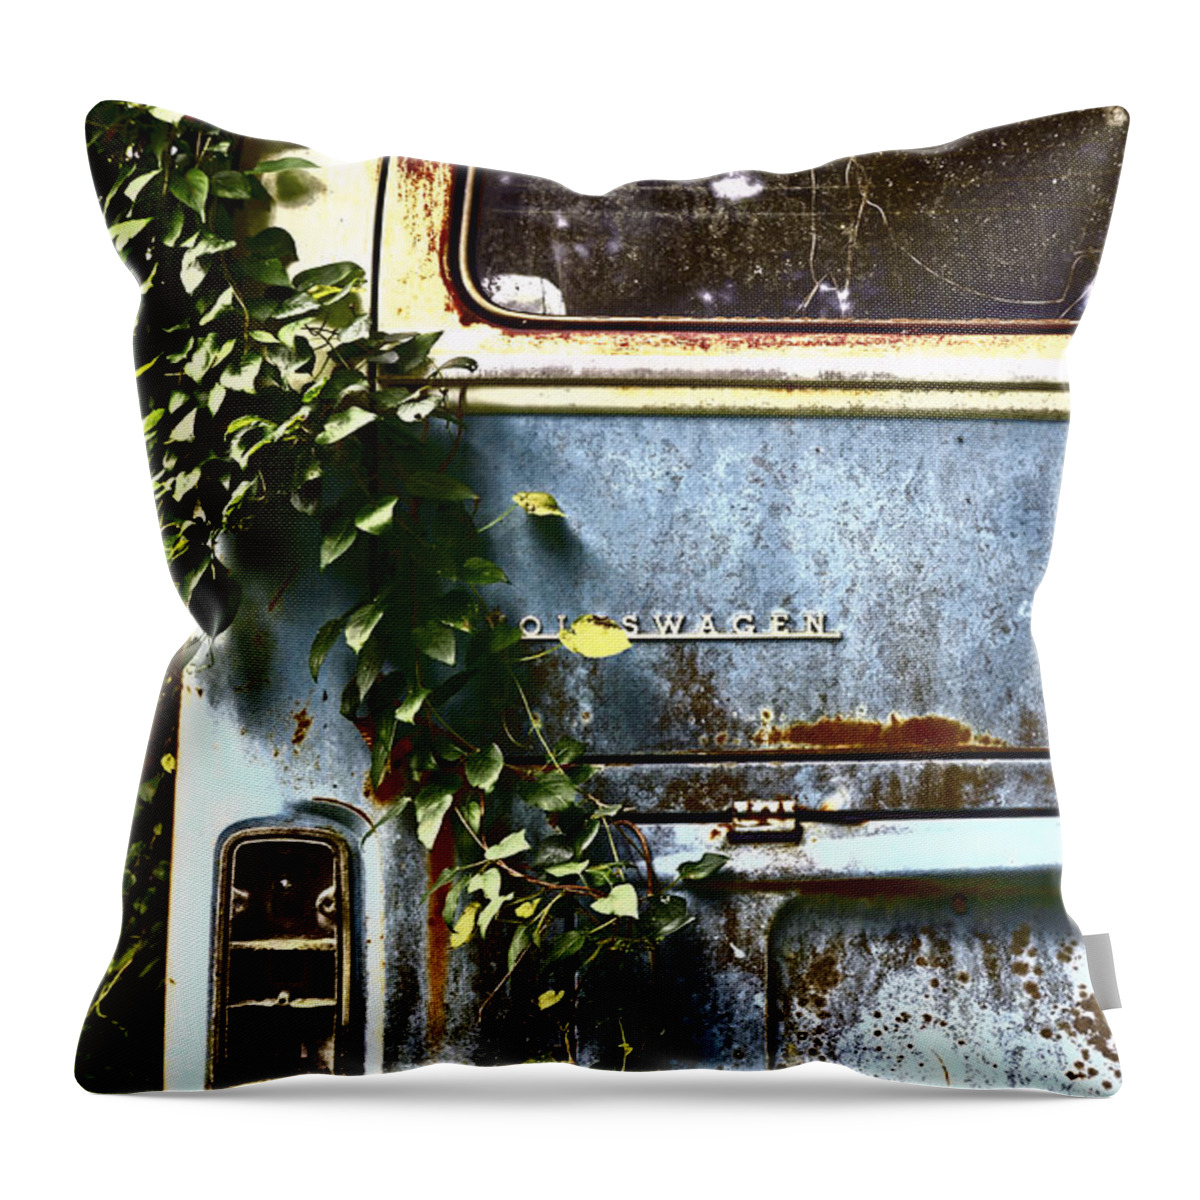 Vw Bus Throw Pillow featuring the photograph Lost In Time by Carolyn Marshall